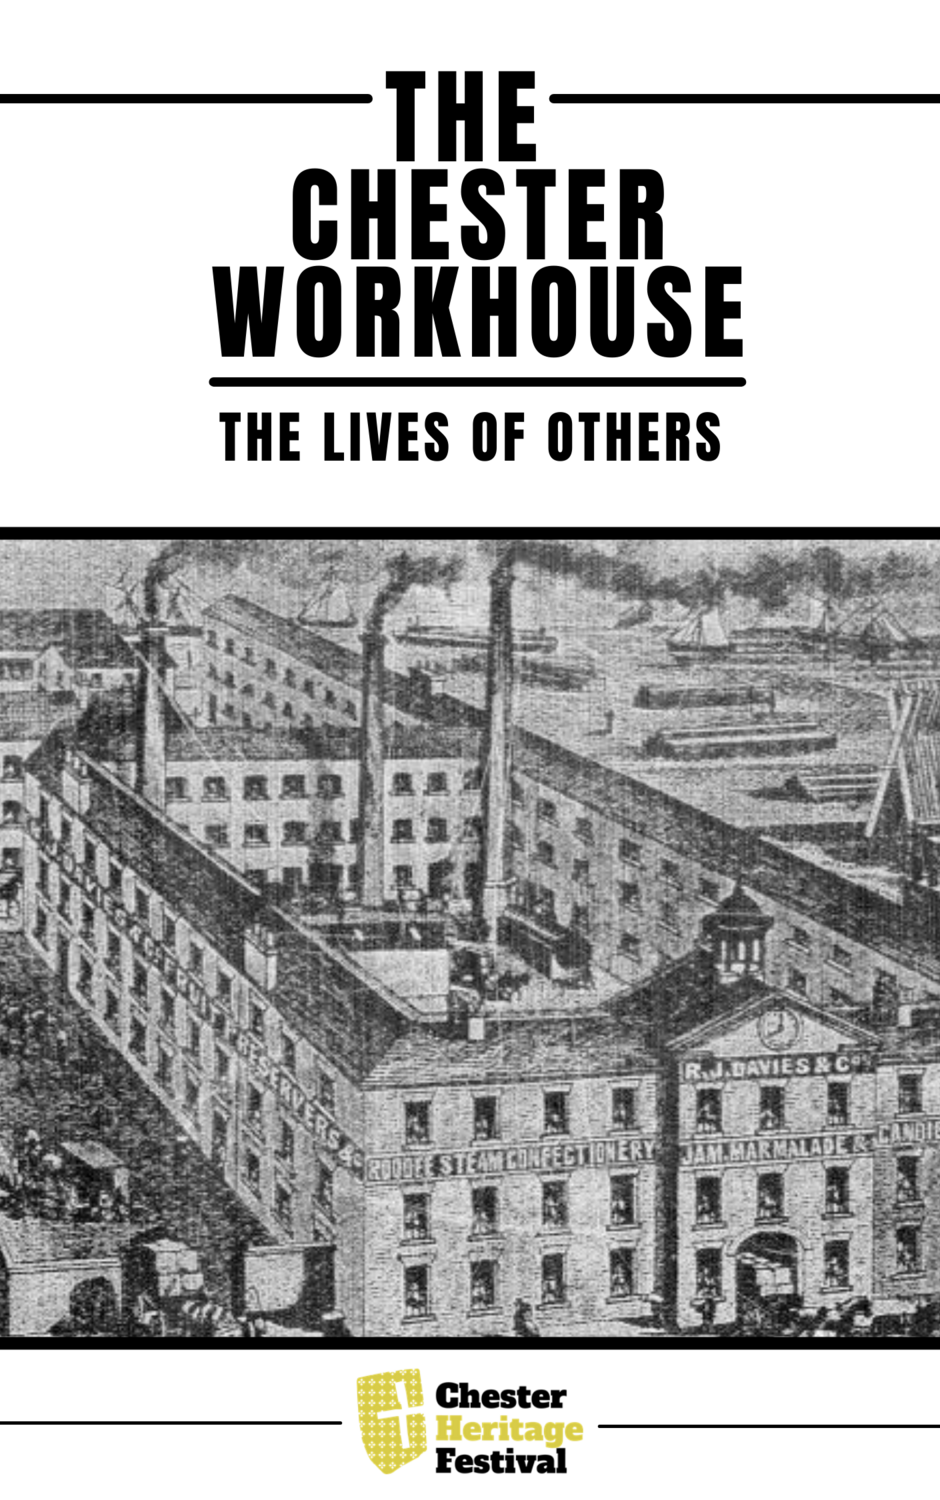 Chester Workhouse: The Lives of Others